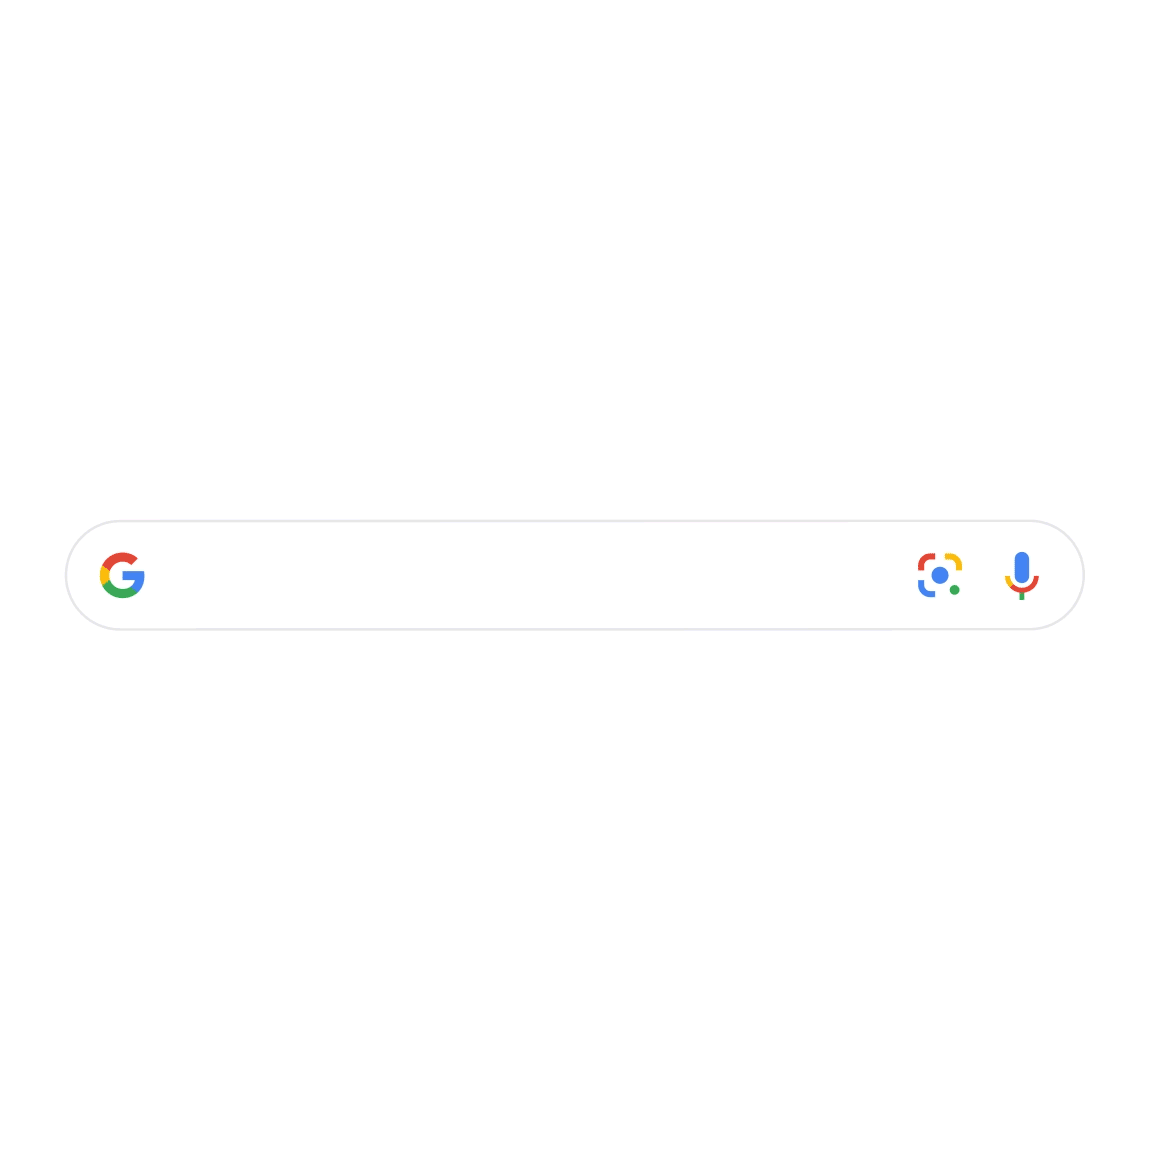 An animation of a misspelled search for YouTube